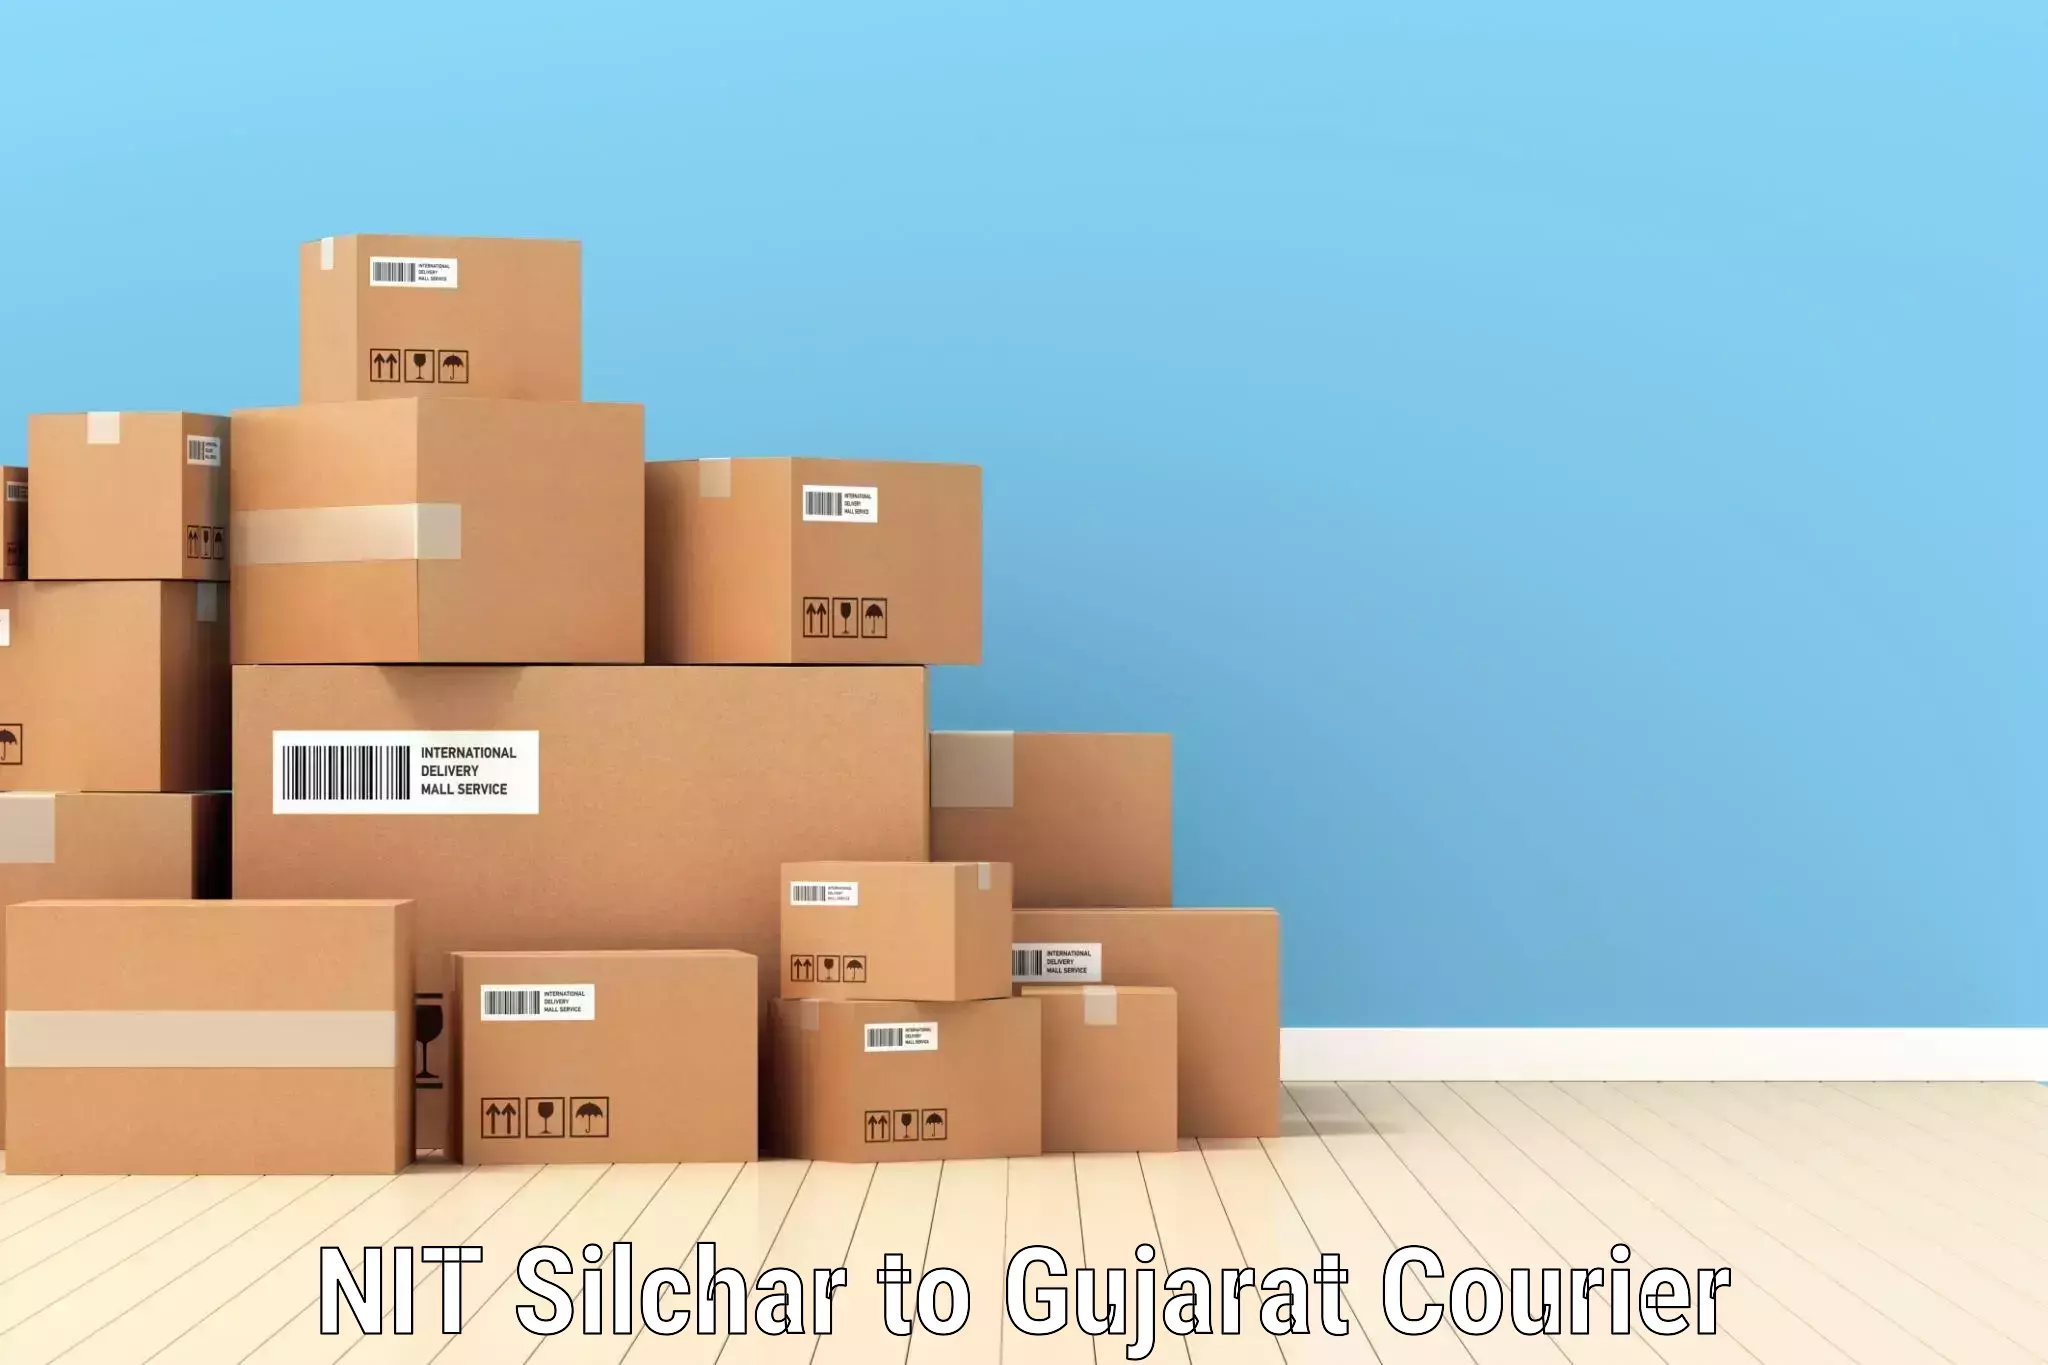 State-of-the-art courier technology in NIT Silchar to Jambusar